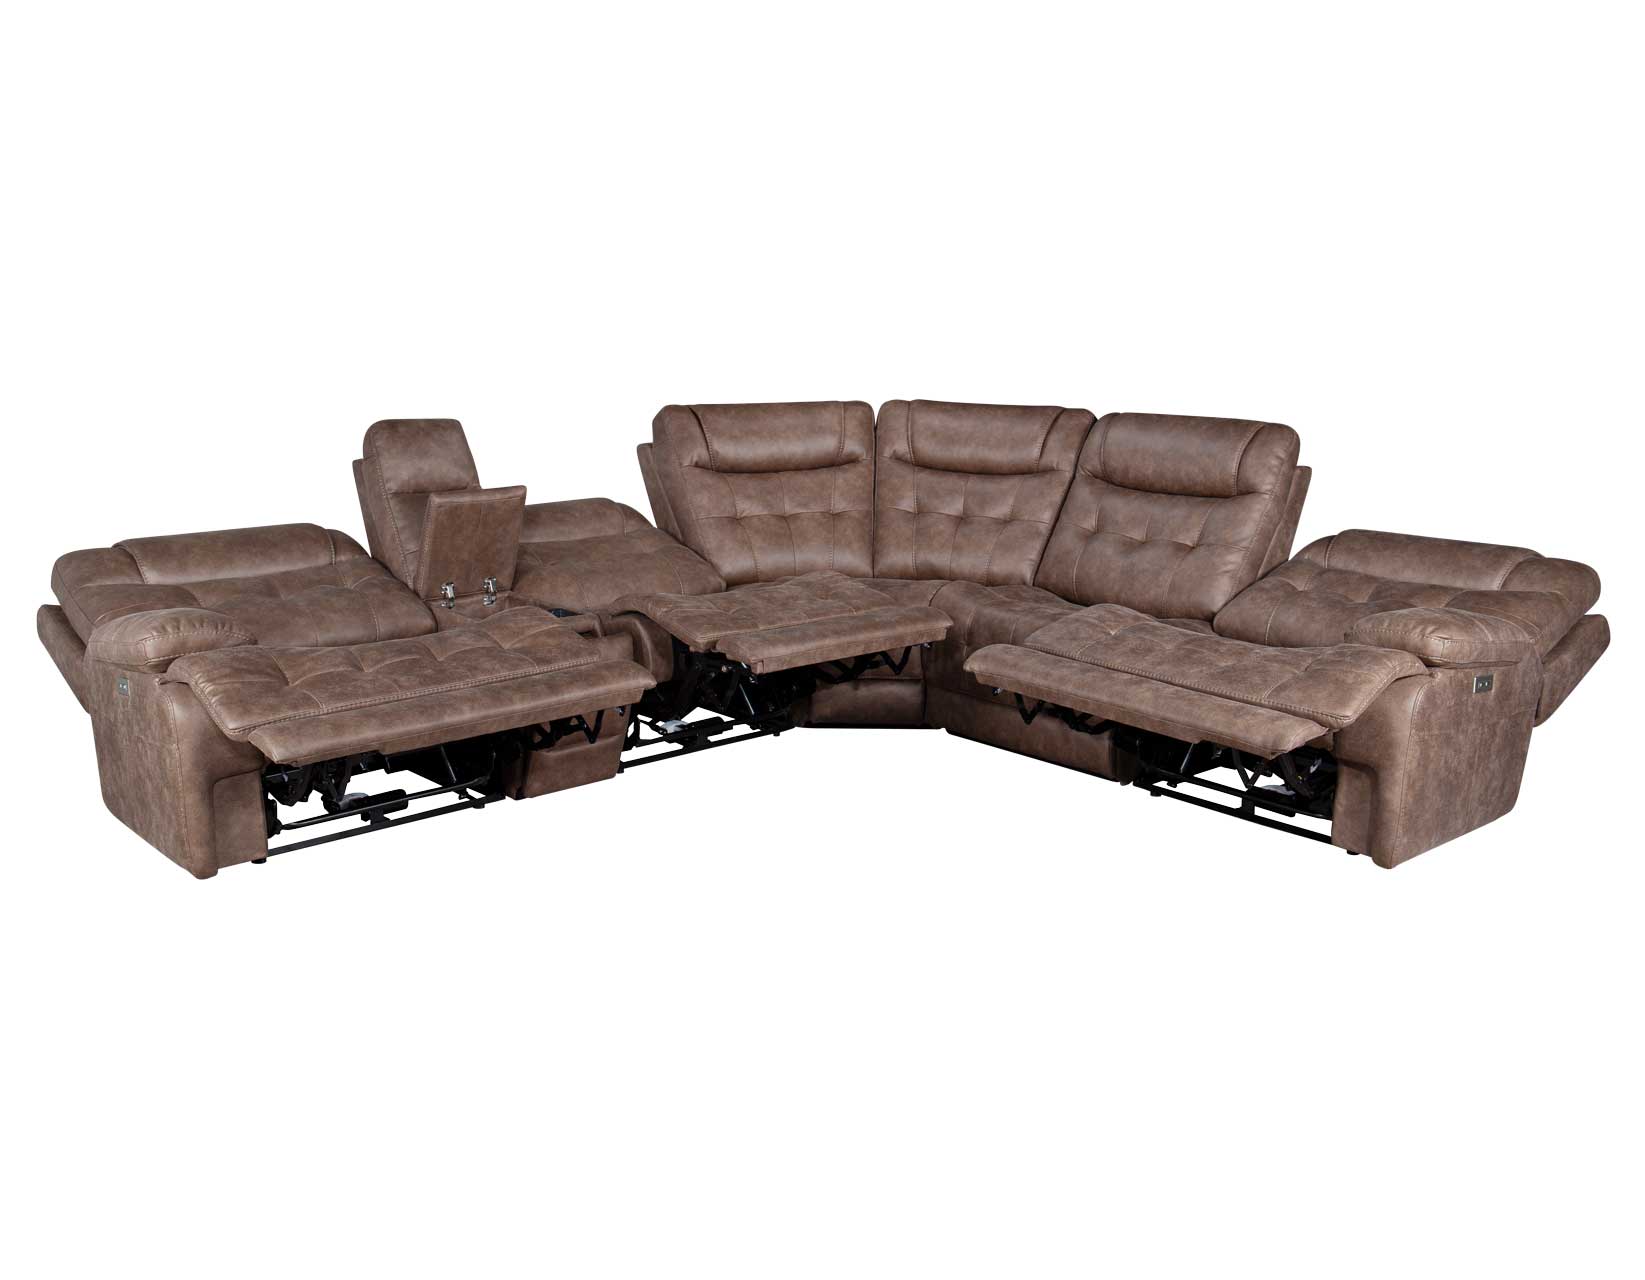 Arlington 6-Piece Dual-Power Reclining Sectional by Steve Silver